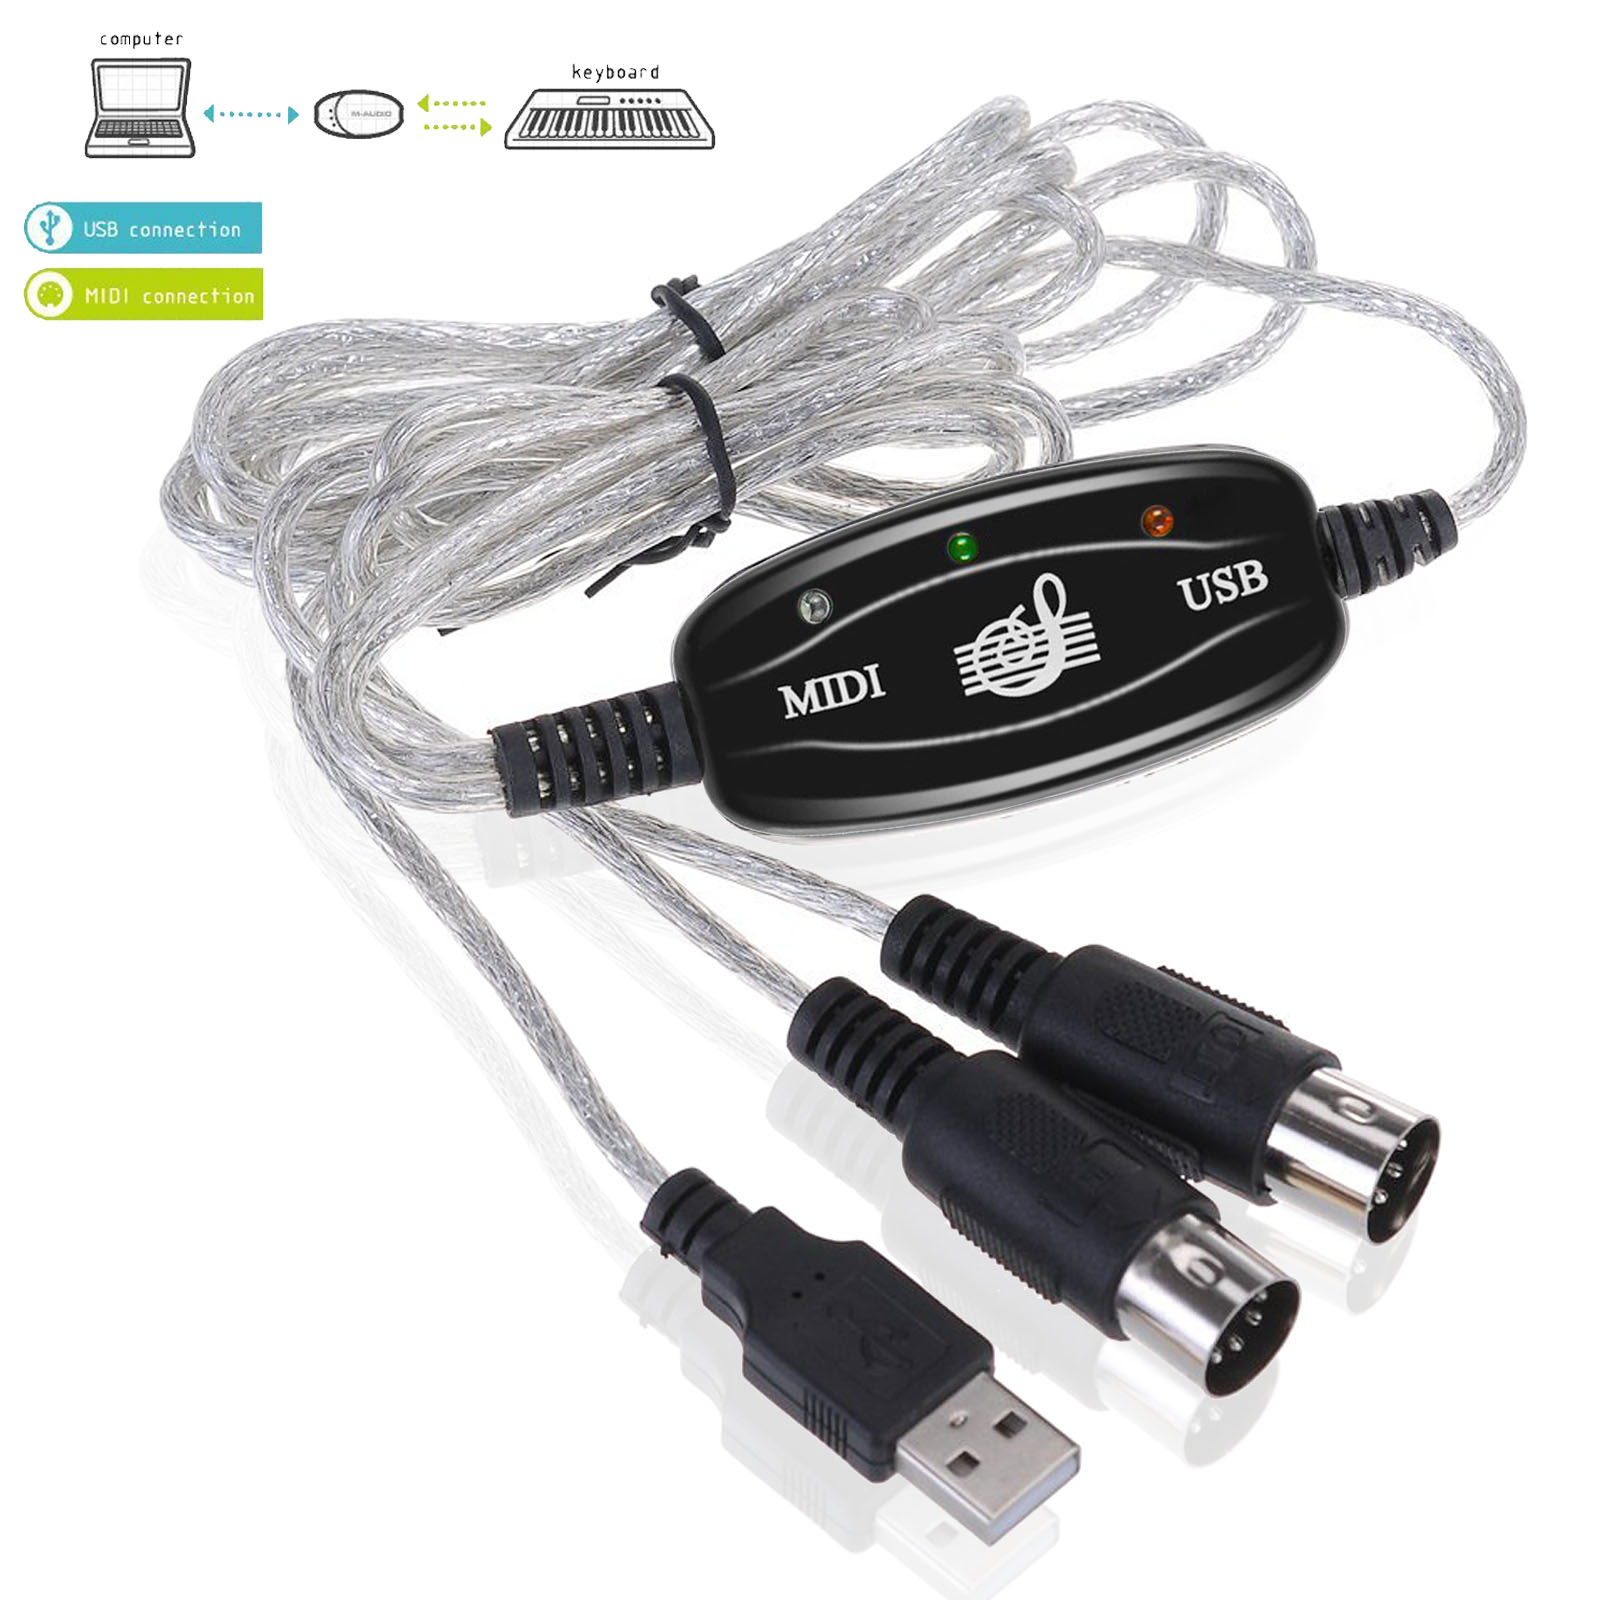 Midi to usb interface cable